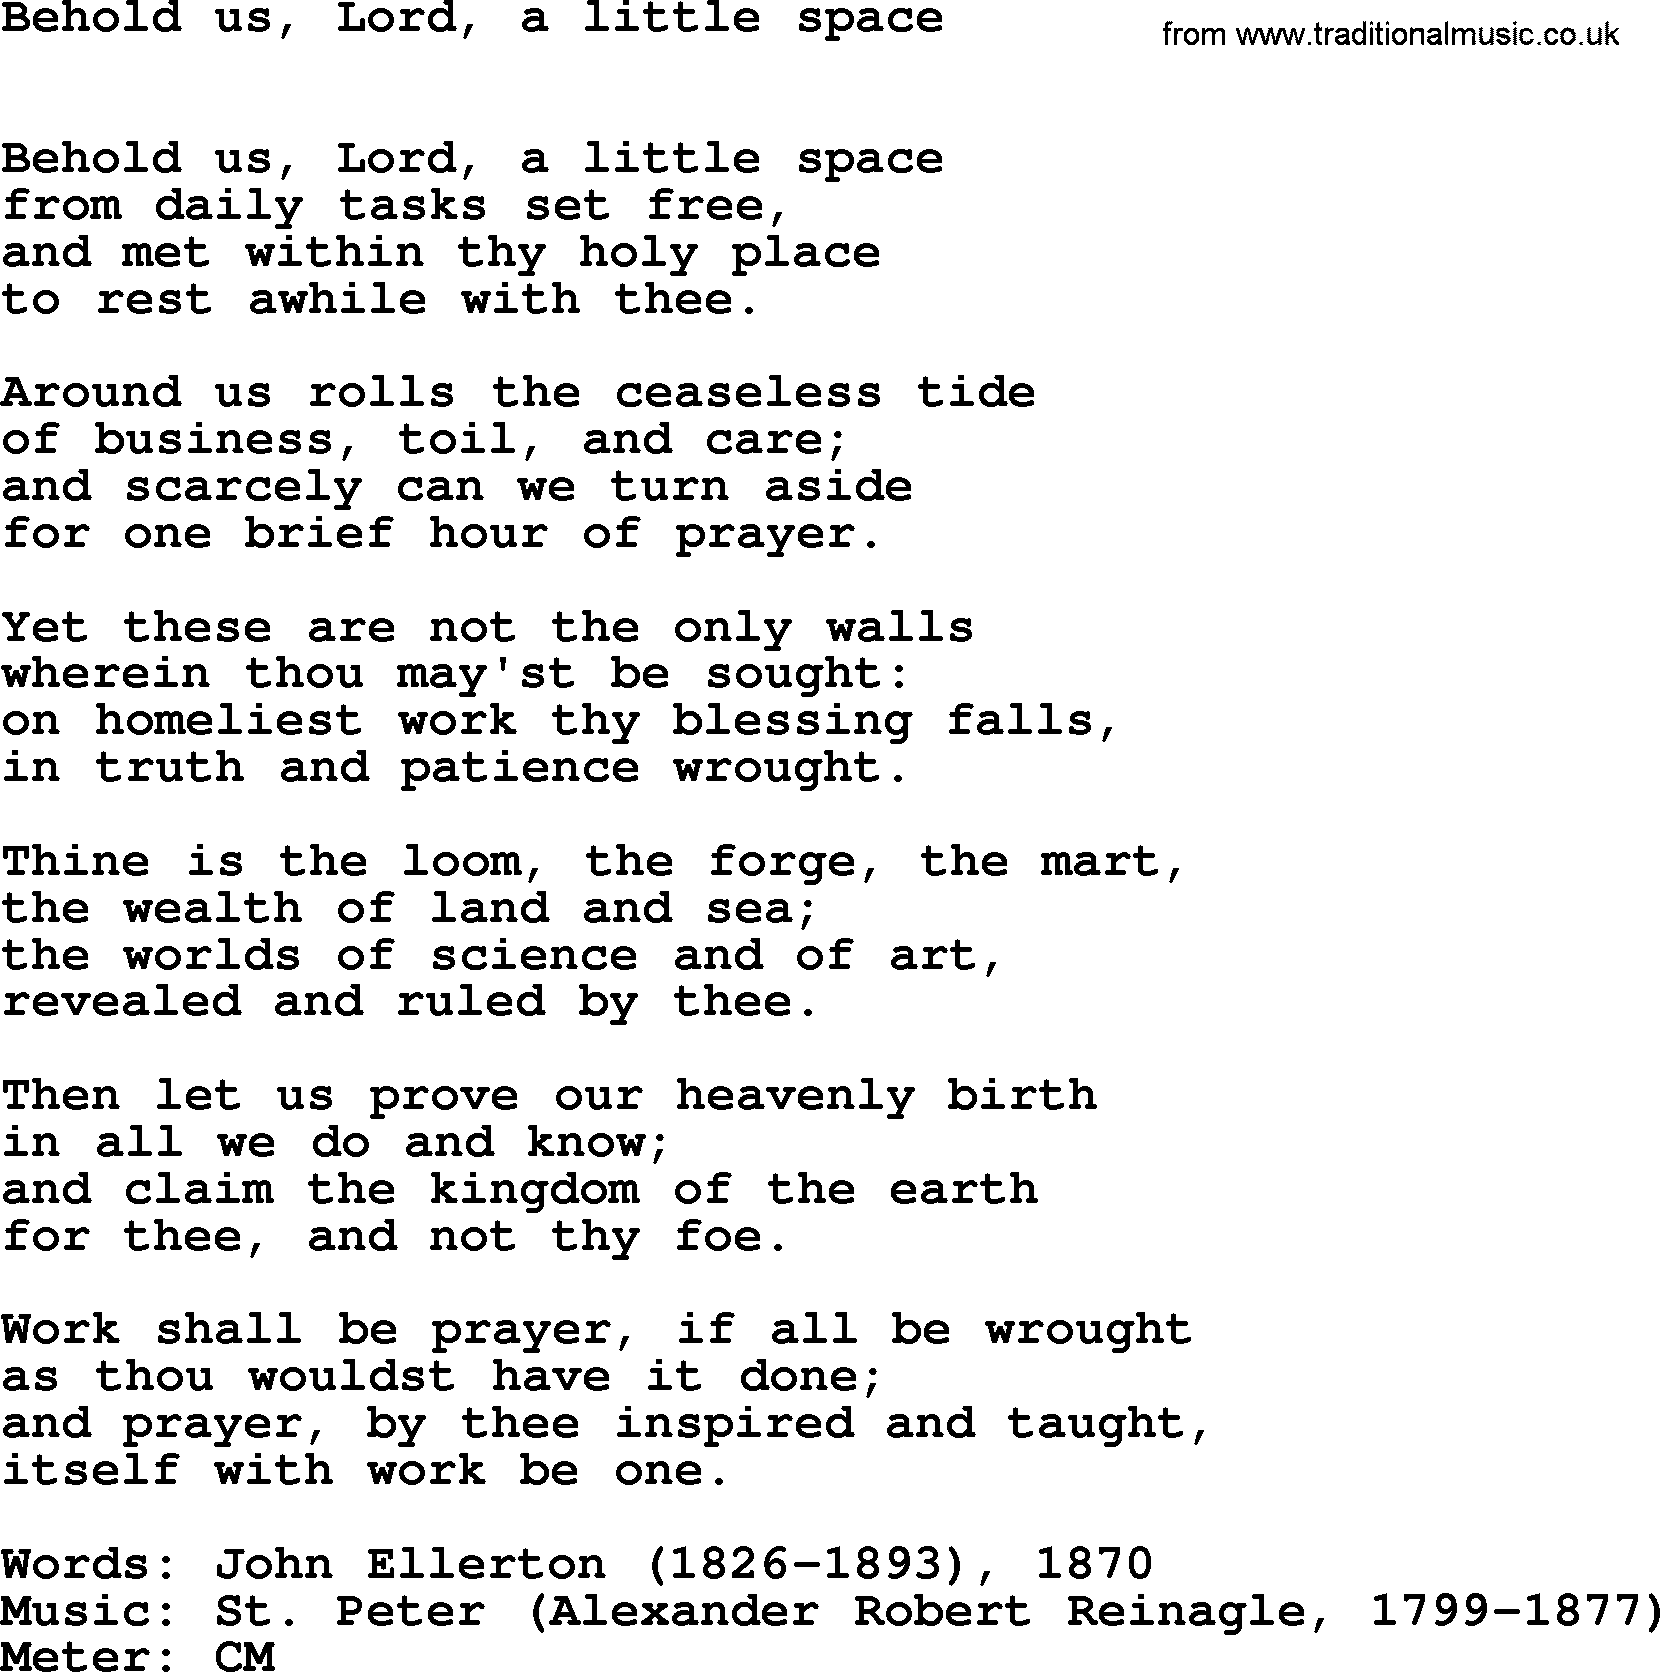 Book of Common Praise Hymn: Behold Us, Lord, A Little Space.txt lyrics with midi music